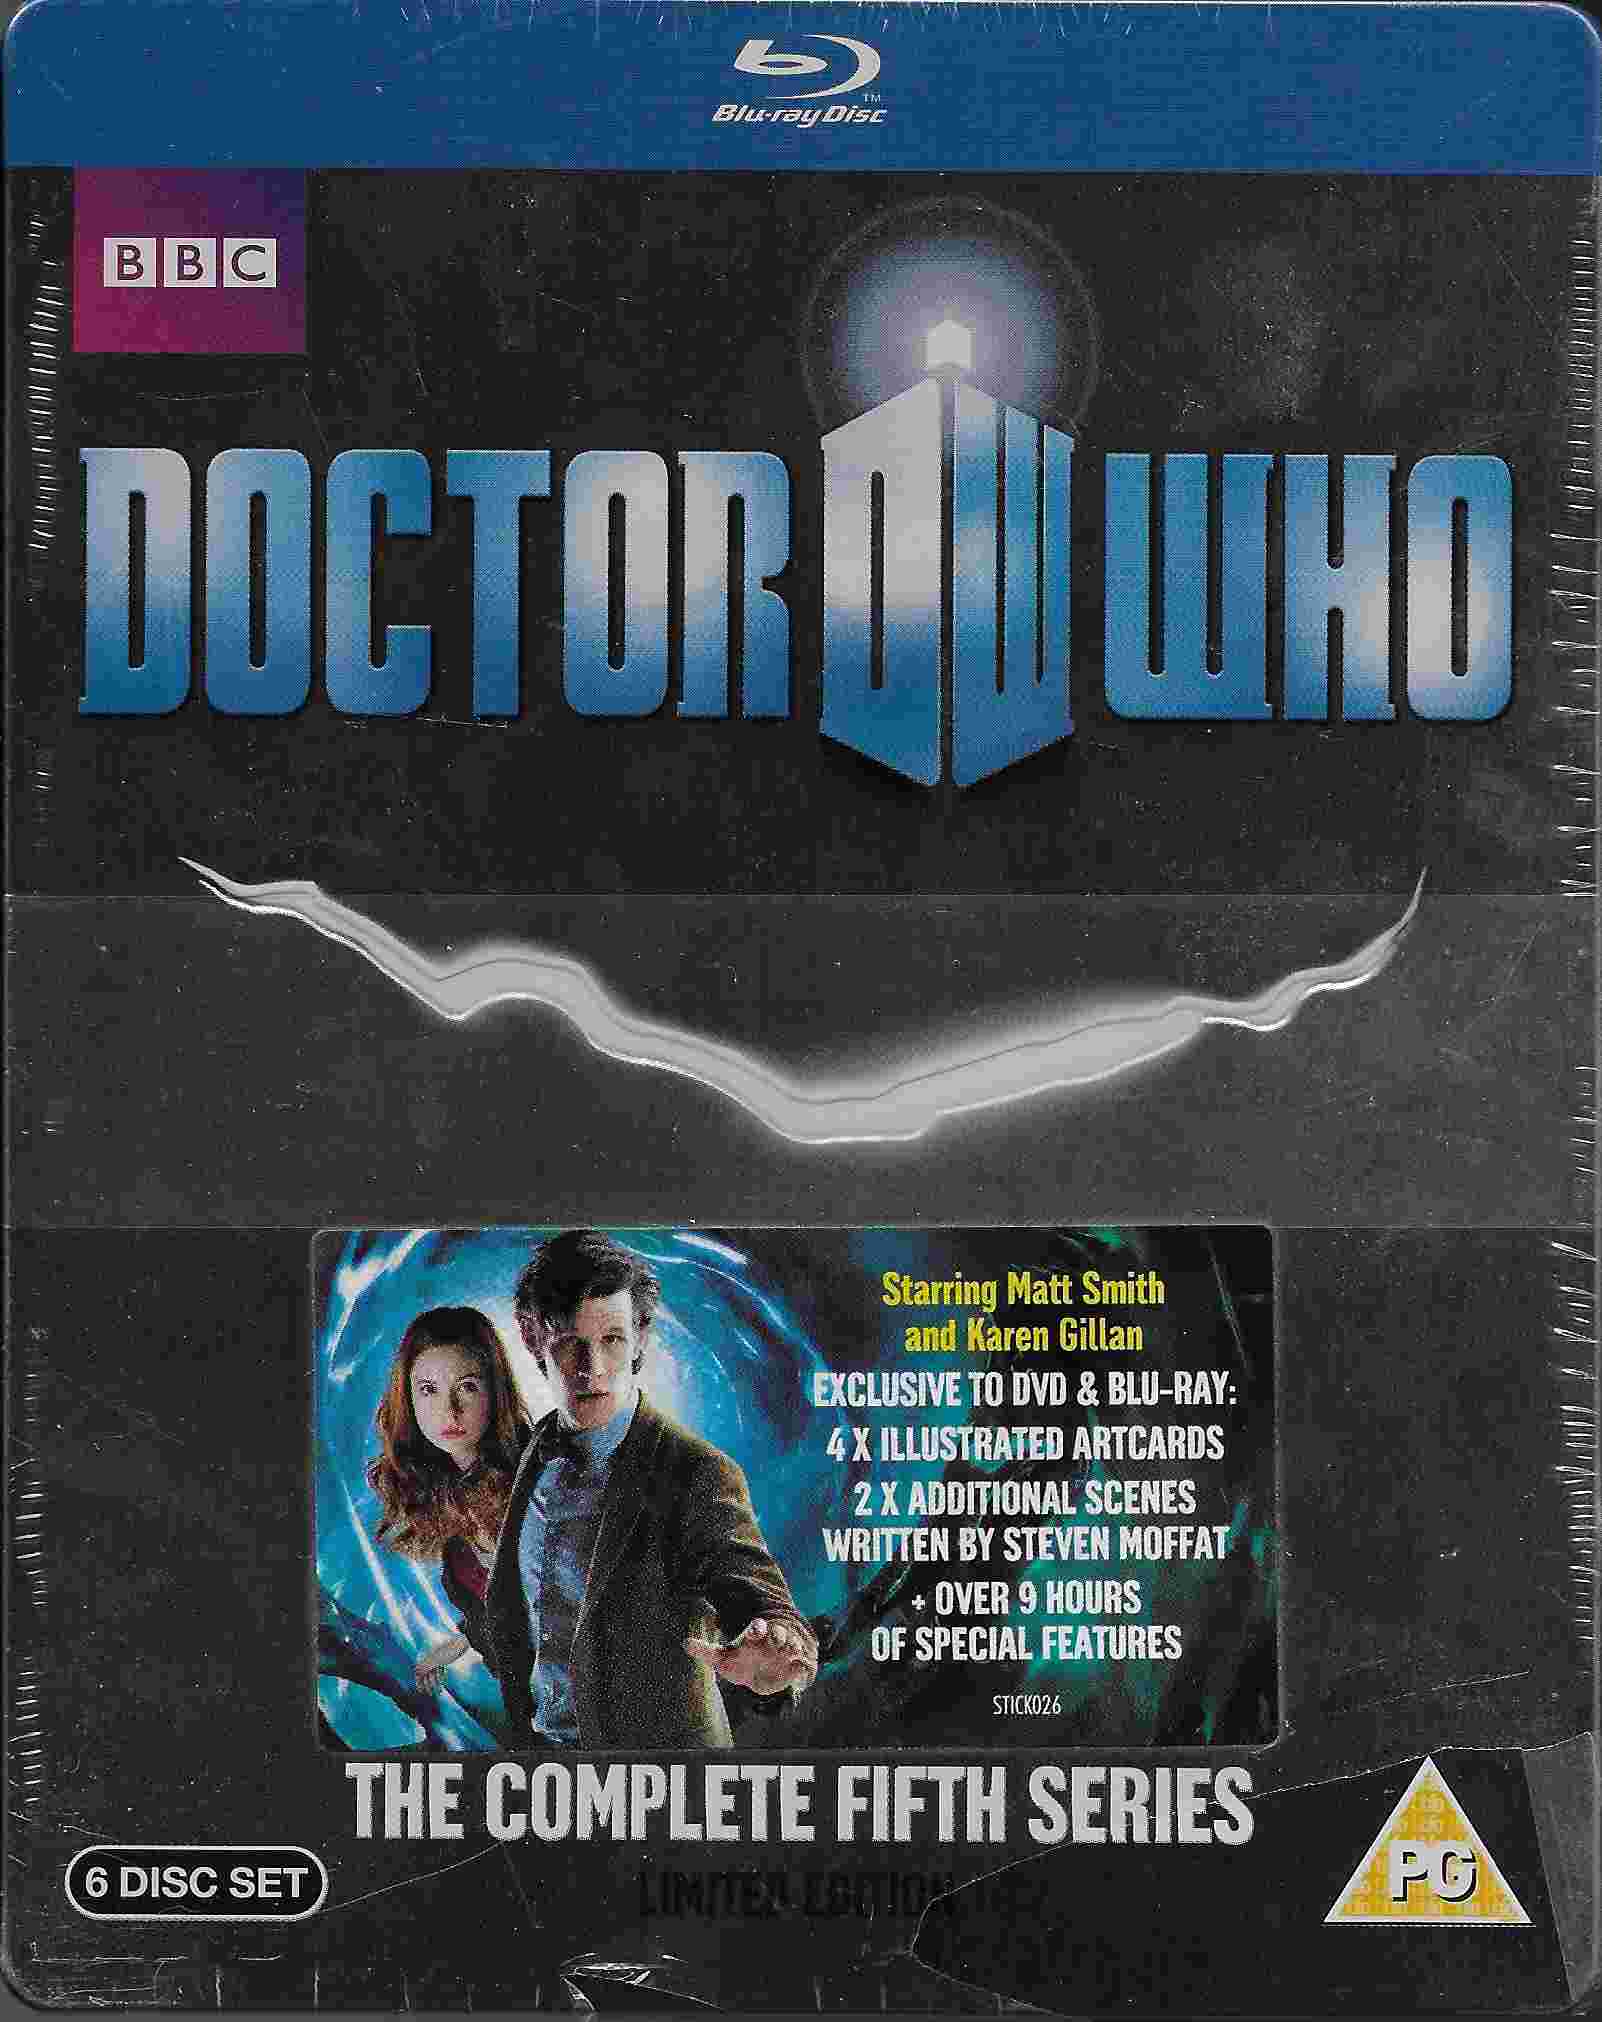 Picture of Doctor Who - The complete fifth series by artist Various from the BBC blu-rays - Records and Tapes library